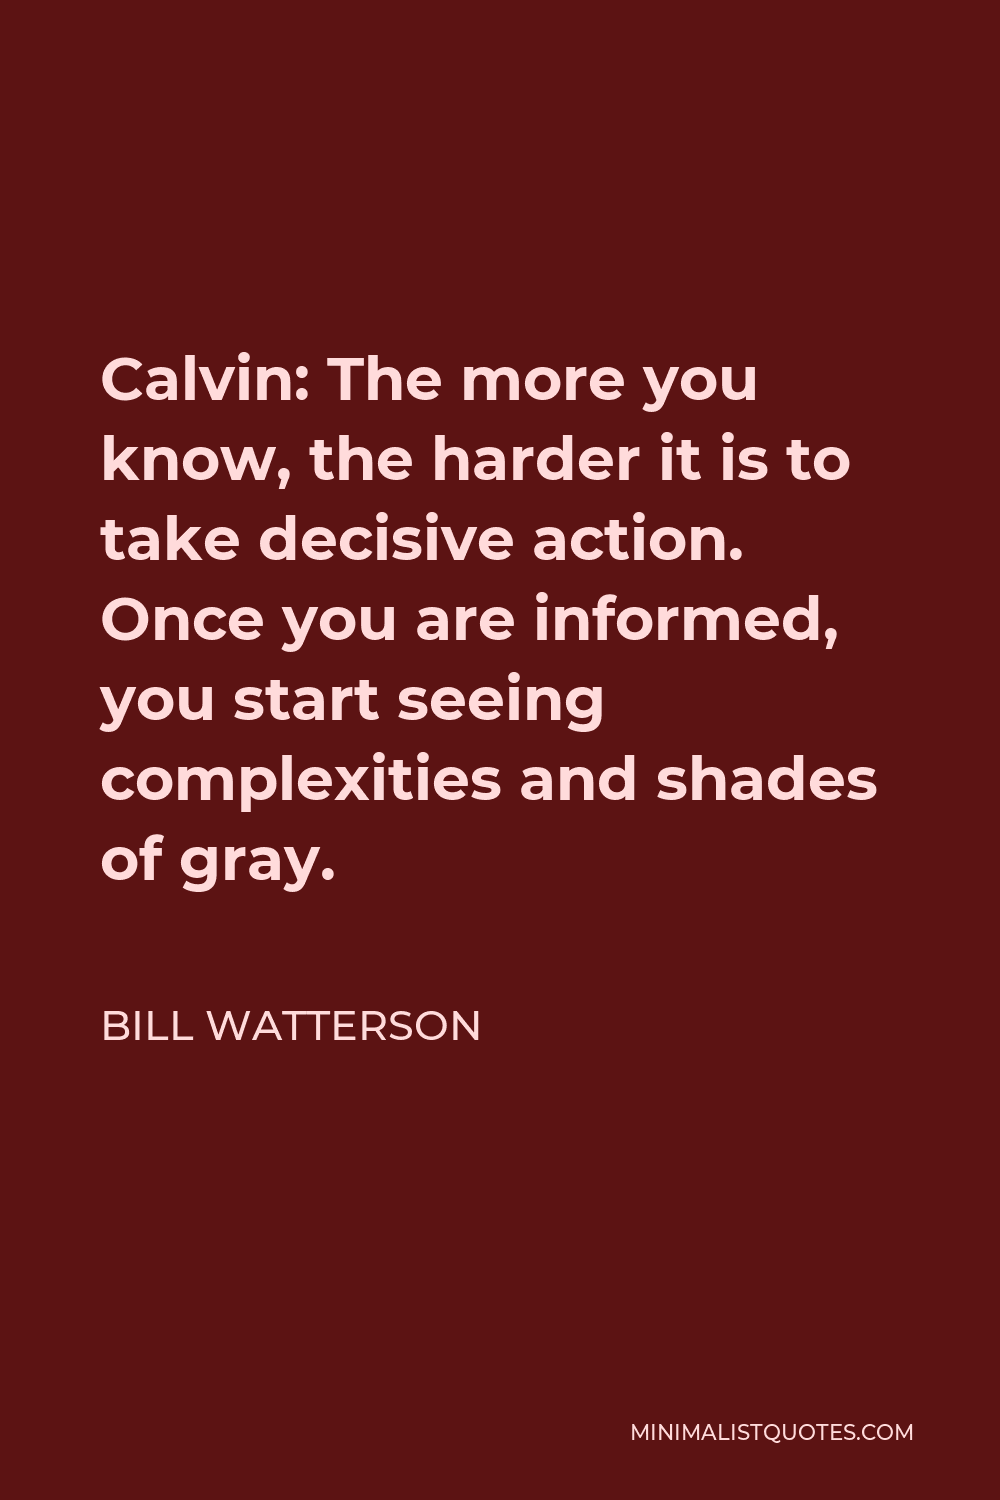 Bill Watterson Quote - Calvin: The more you know, the harder it is to take decisive action. Once you are informed, you start seeing complexities and shades of gray.